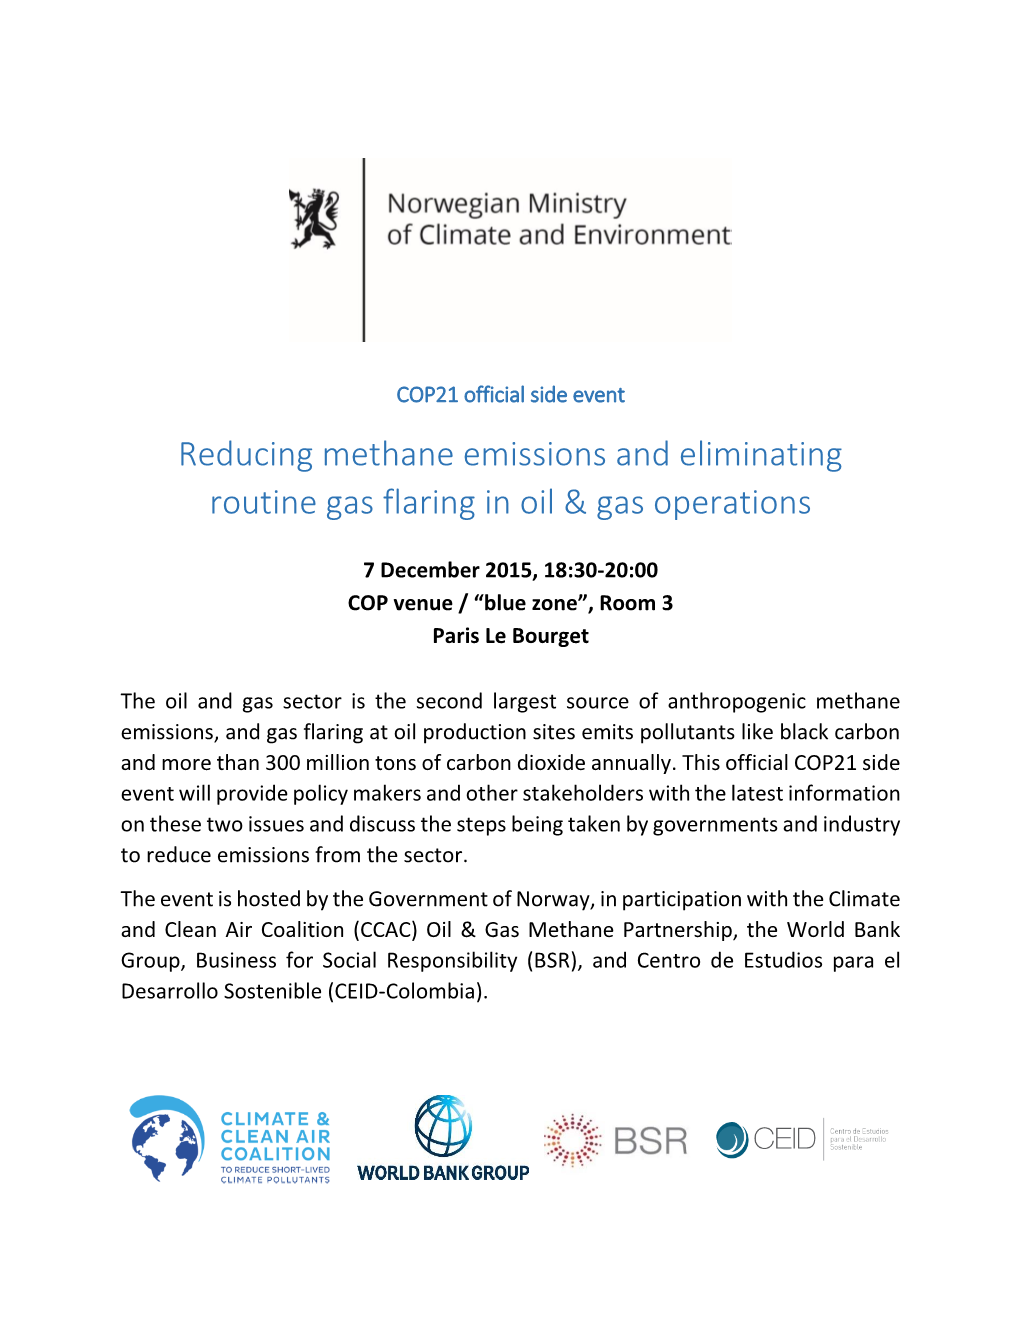 Reducing Methane Emissions and Eliminating Routine Gas Flaring in Oil & Gas Operations